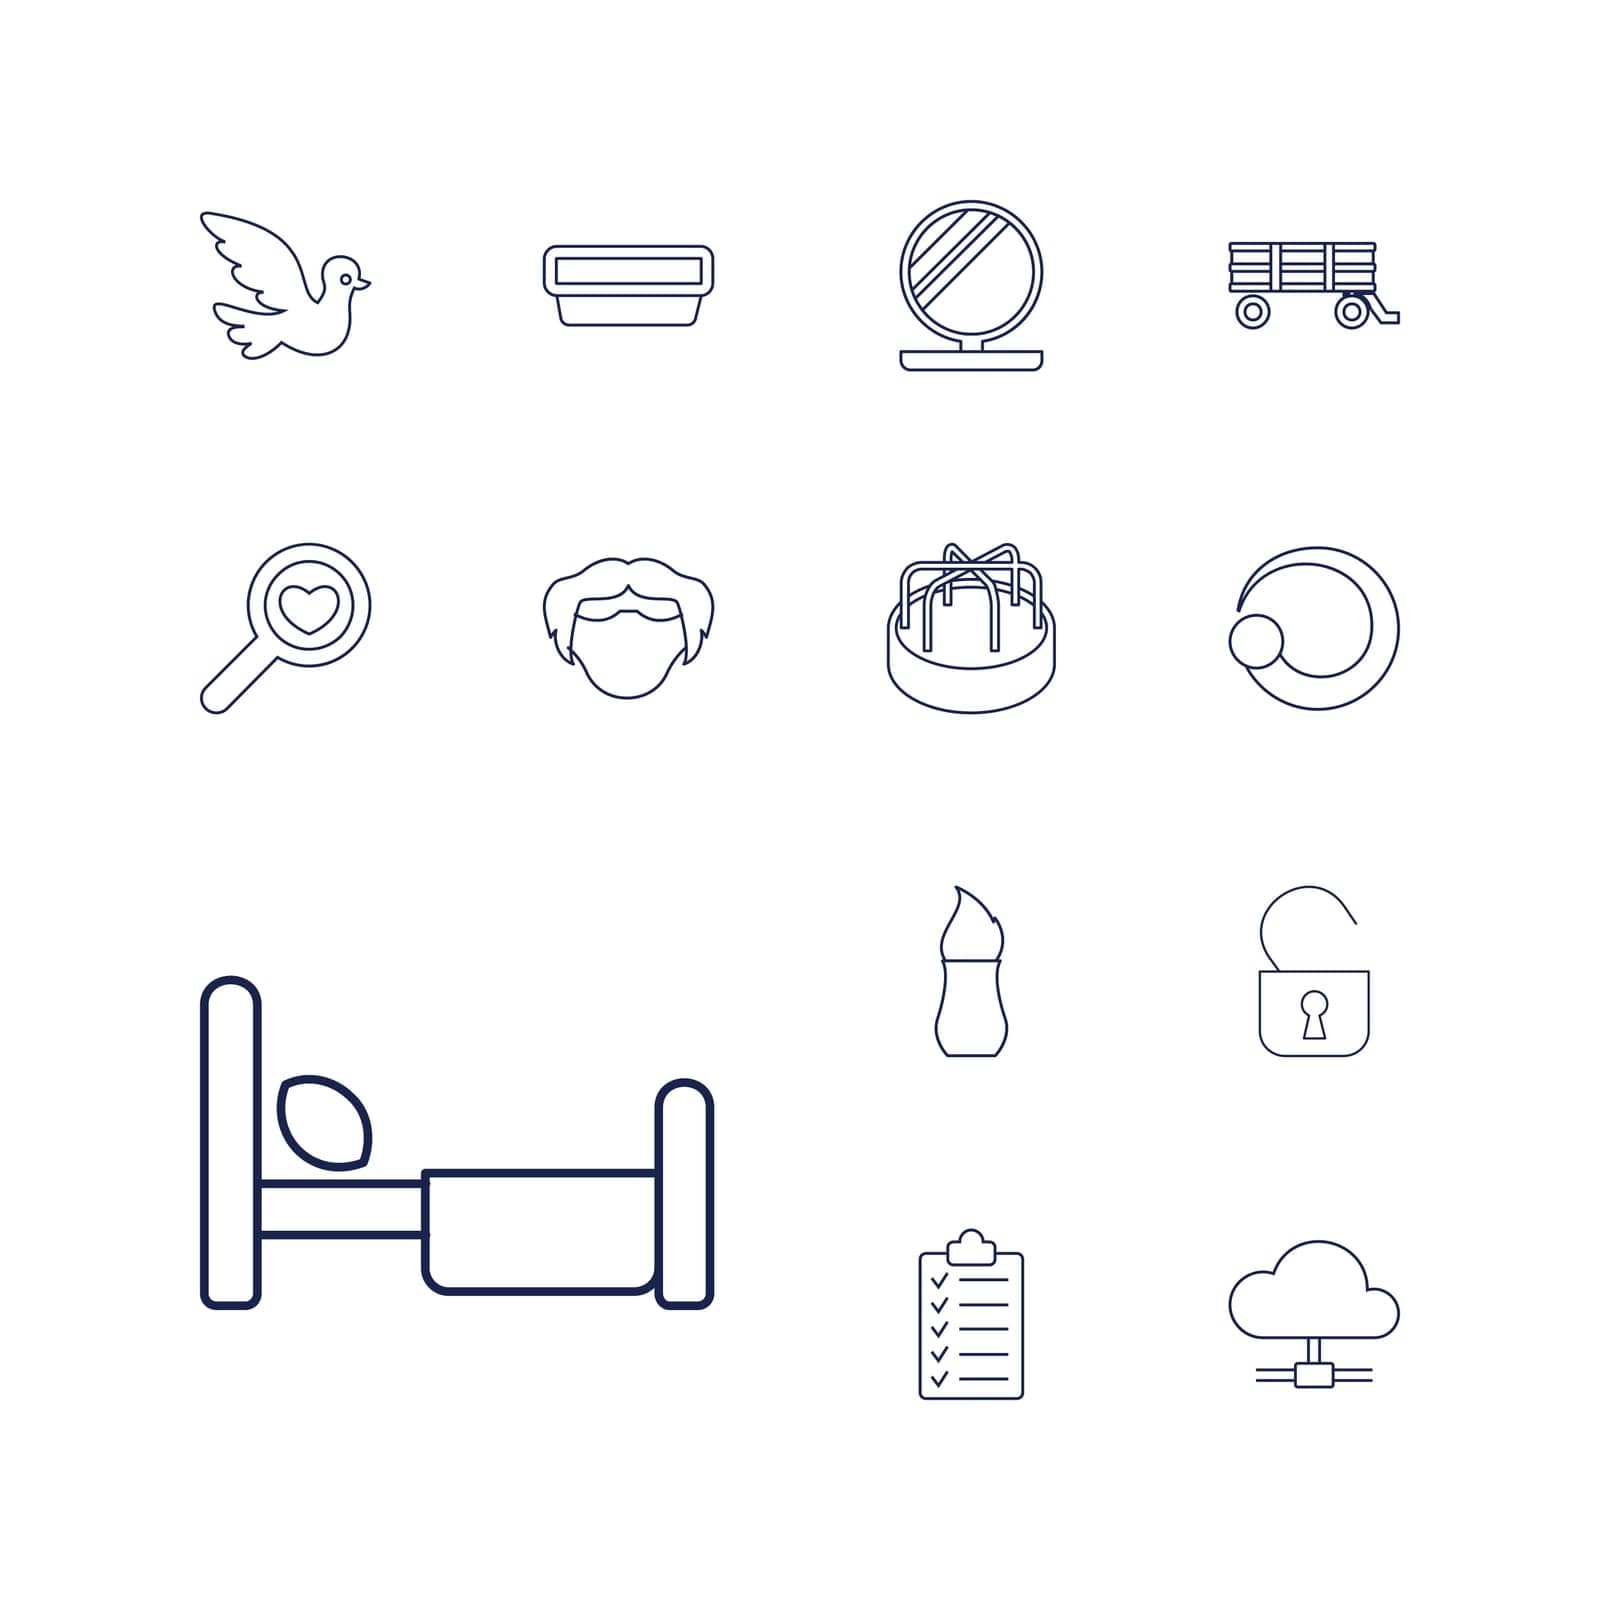 bed,symbol,icon,sign,isolated,for,powder,carousel,pictograph,cloud,hair,search,white,pot,web,plants,bird,design,lock,playground,vector,man,graphic,element,brush,barrow,art,set,black,equipment,opened,checklist,collection,loading,heart,hairstyle,face,background,silhouette,style,illustration,object,child by ogqcorp